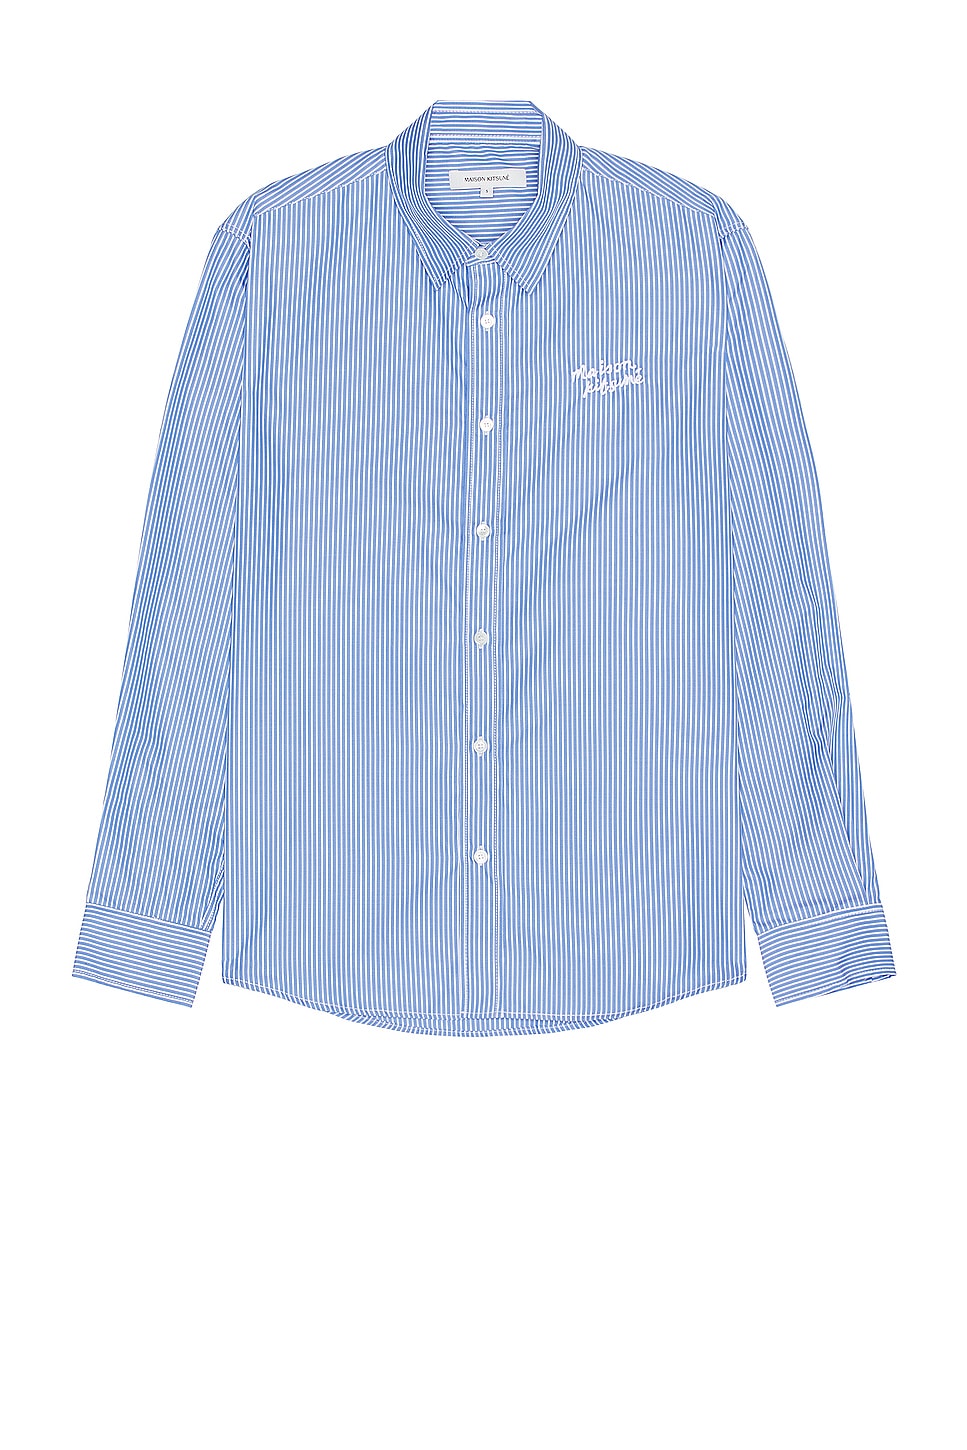 Image 1 of Maison Kitsune Casual Striped Shirt in Sky Blue Stripes